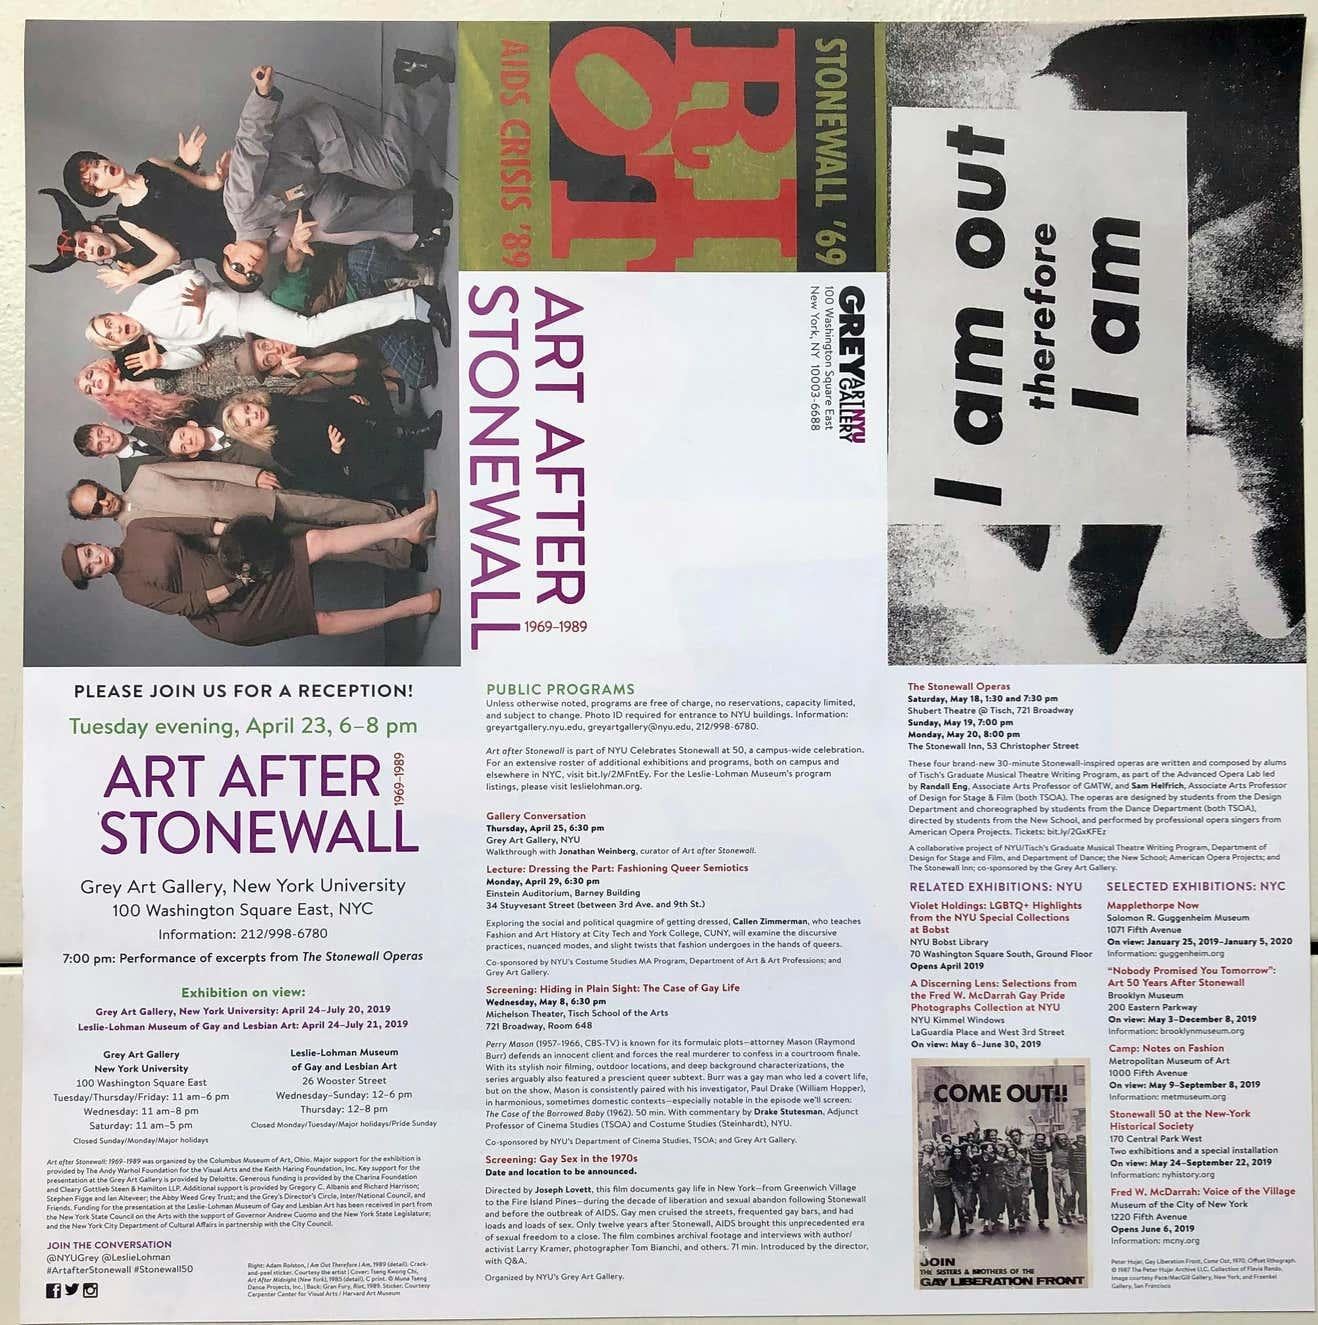 Keith Haring Art after Stonewall exhibition poster: printed in conjunction with the 2019 exhibition of the same name at New York University's Grey Art Gallery. Poster is derived from Haring's famous 1980s illustration for National Coming Out Day.